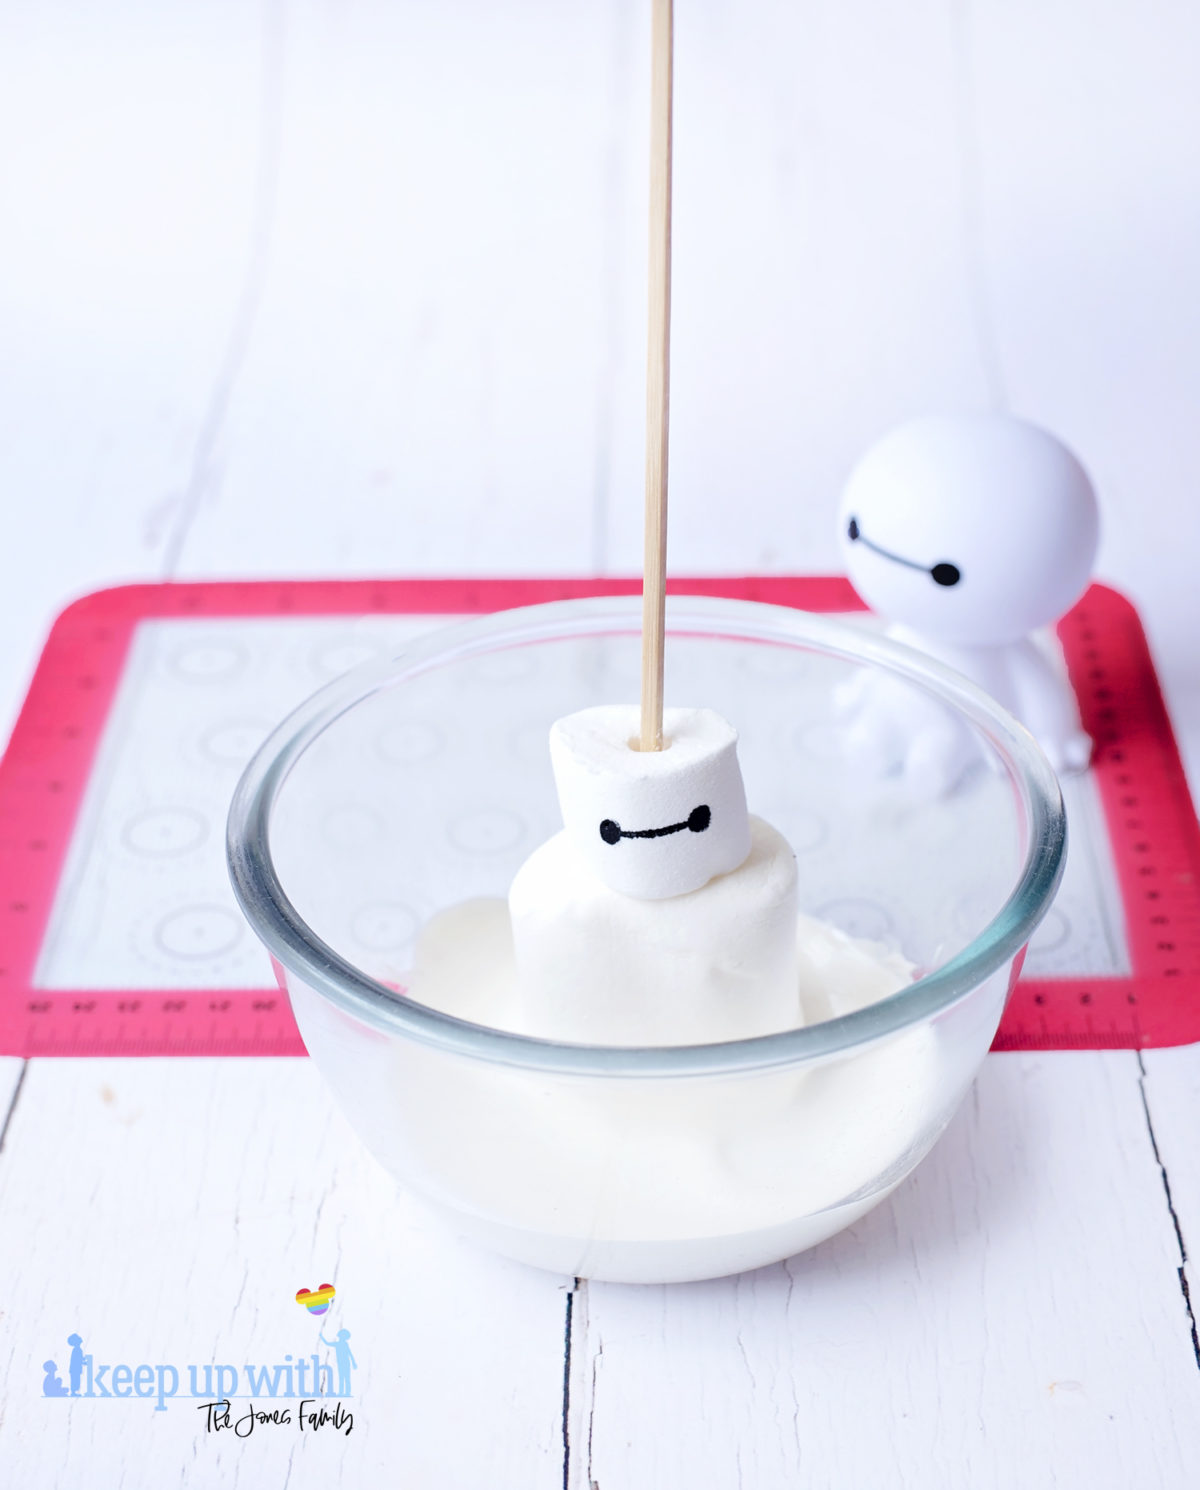 Image shows a plastic Baymax figure from Disney Pixar's Big Hero 6 sat on a white tabletop. In front of him is a glass bowl containing heated white candy melts and a Baymax Marshmallow Pop, being coated. Image by keep up with the jones family.